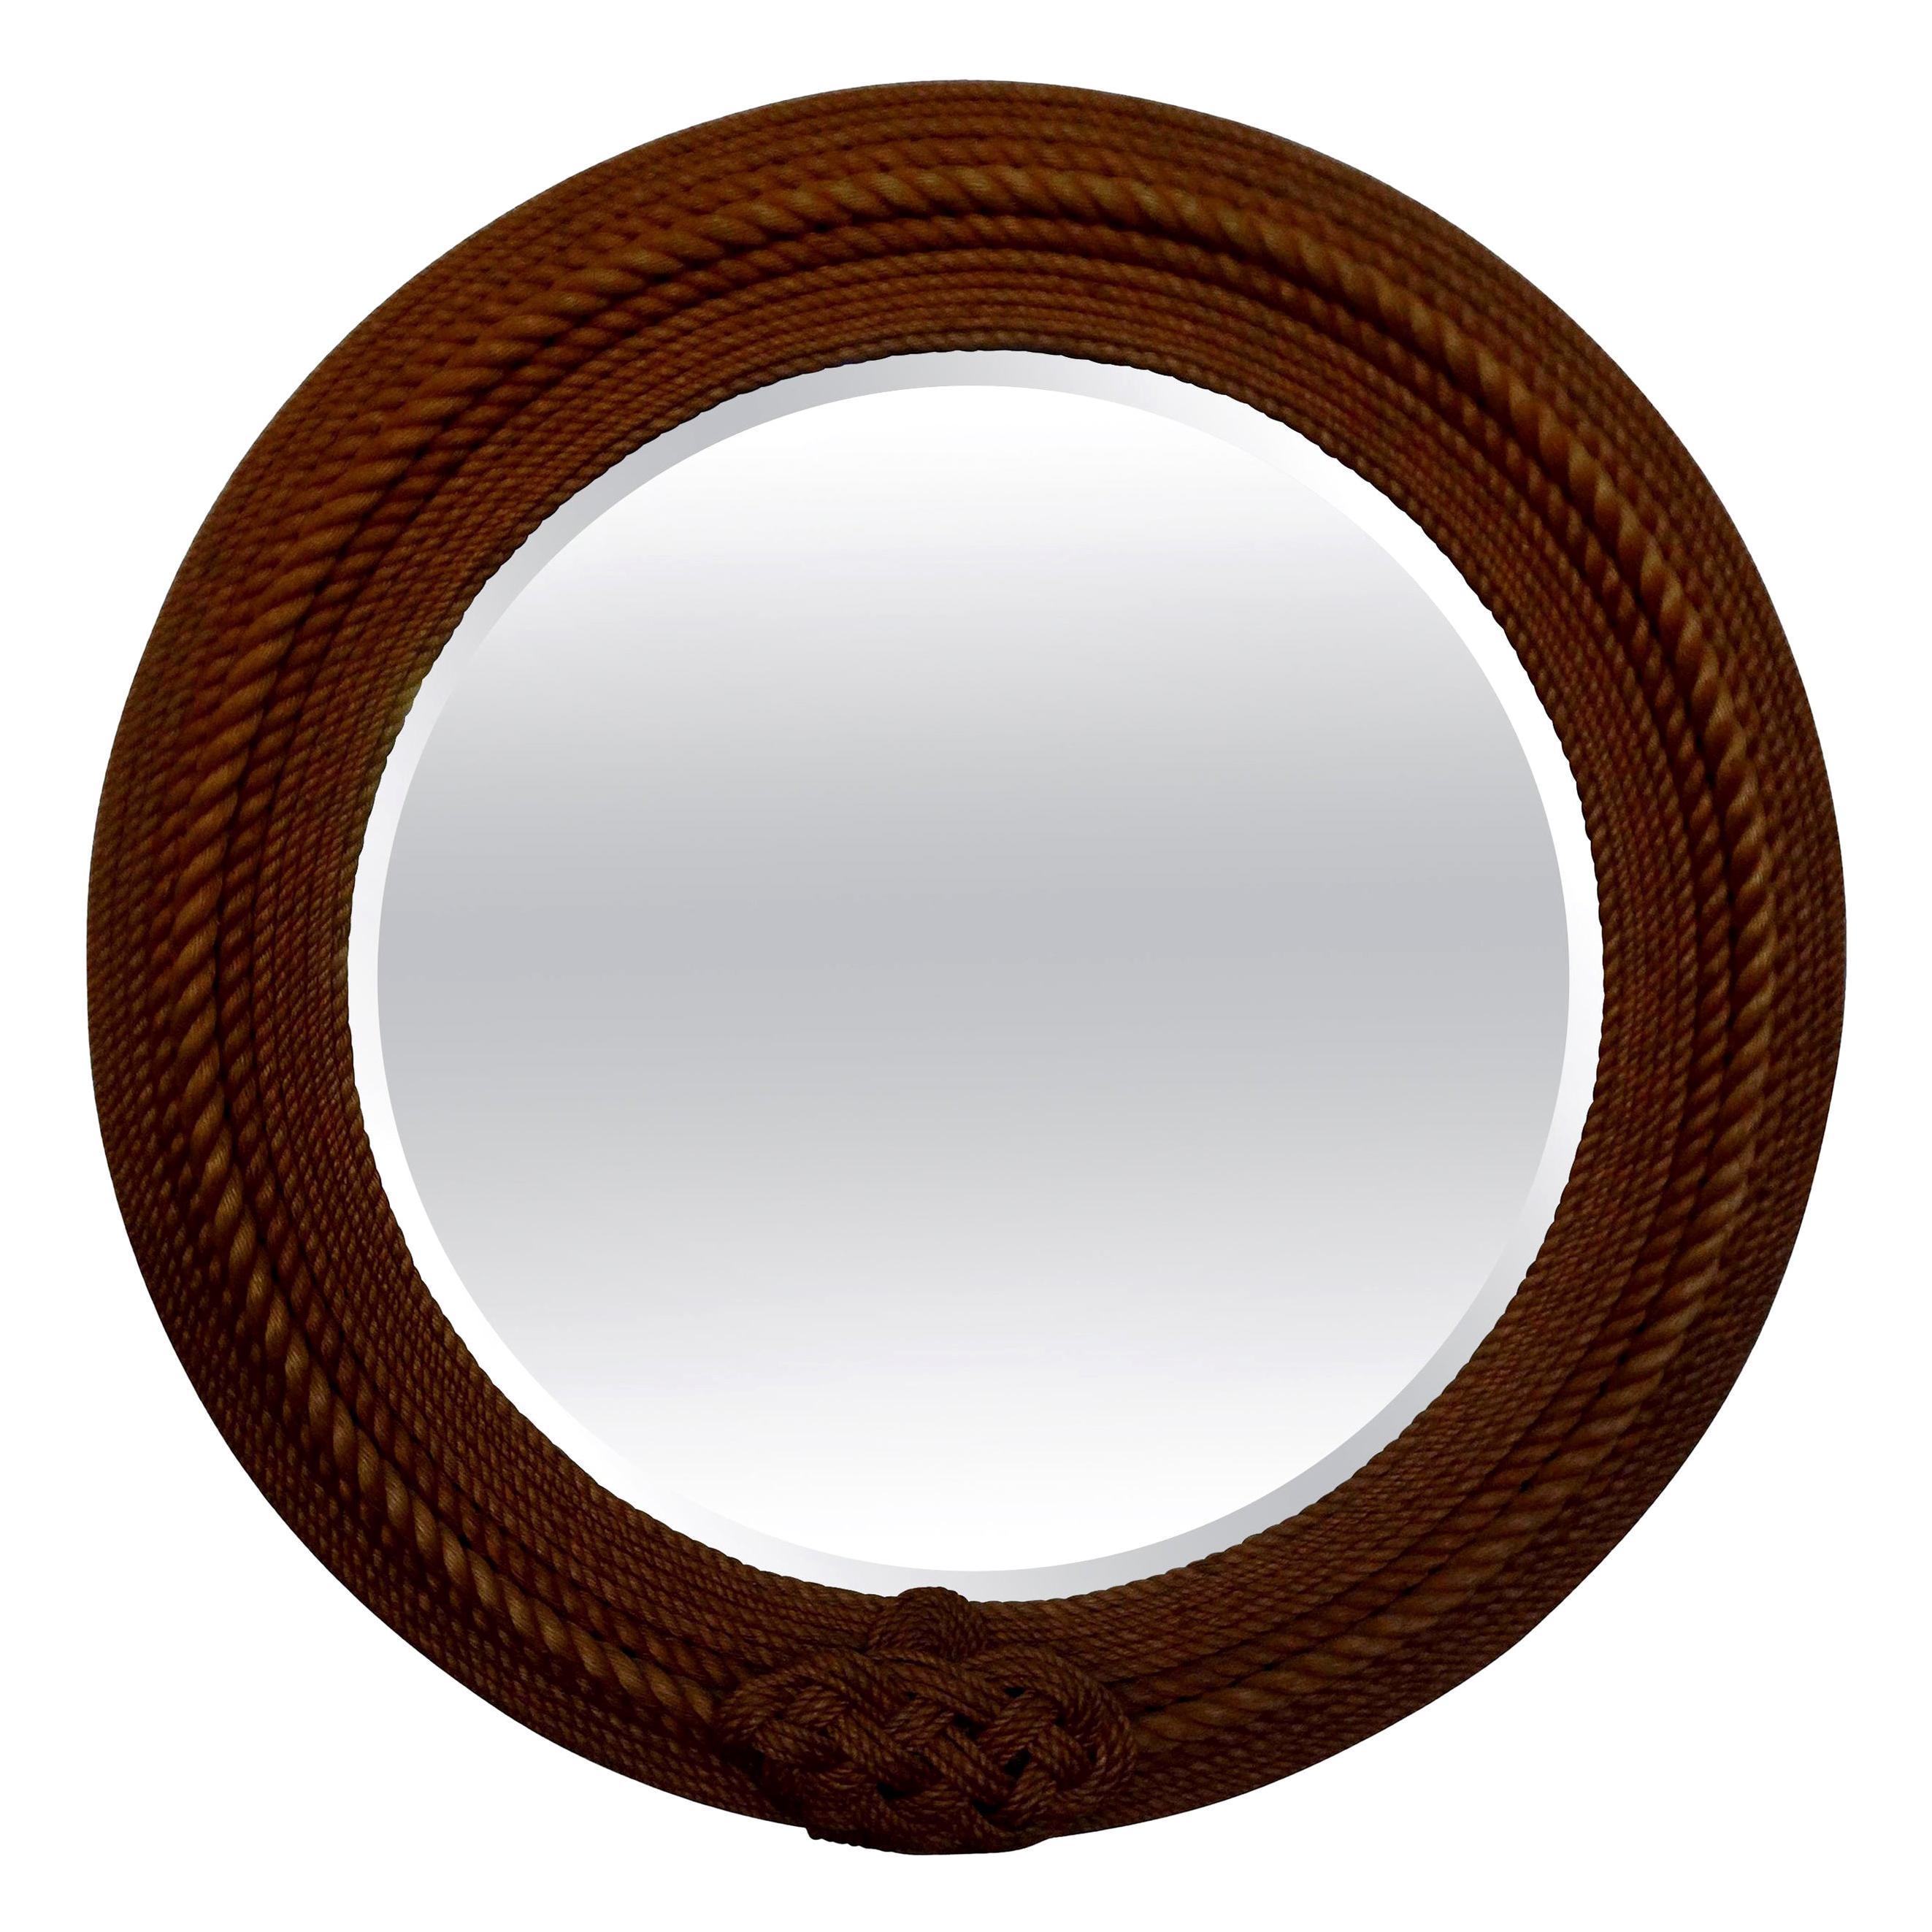 Huge French round rope beveled mirror by Adrien Audoux & Frida Minet. This stunning rope by Audoux & Minet mirror was made in Golfe-Juan, France, circa 1950s. It's in extremely good condition given its age. Featured French rope beveled mirror has a